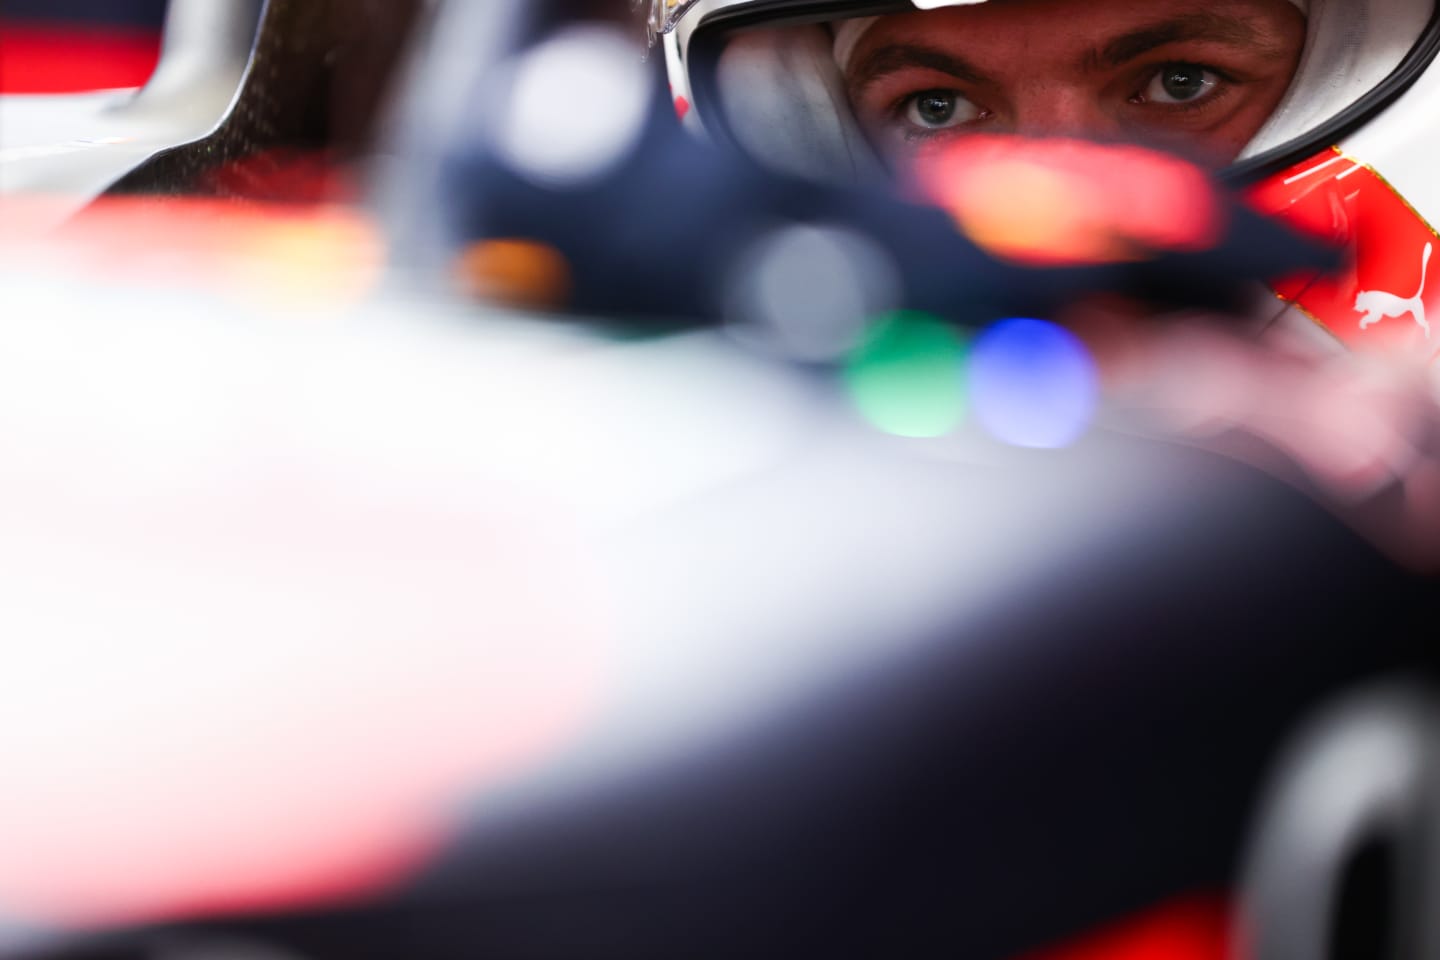 SOCHI, RUSSIA - SEPTEMBER 25: Max Verstappen of Netherlands and Red Bull Racing prepares to drive in the garage during qualifying ahead of the F1 Grand Prix of Russia at Sochi Autodrom on September 25, 2021 in Sochi, Russia. (Photo by Mark Thompson/Getty Images)